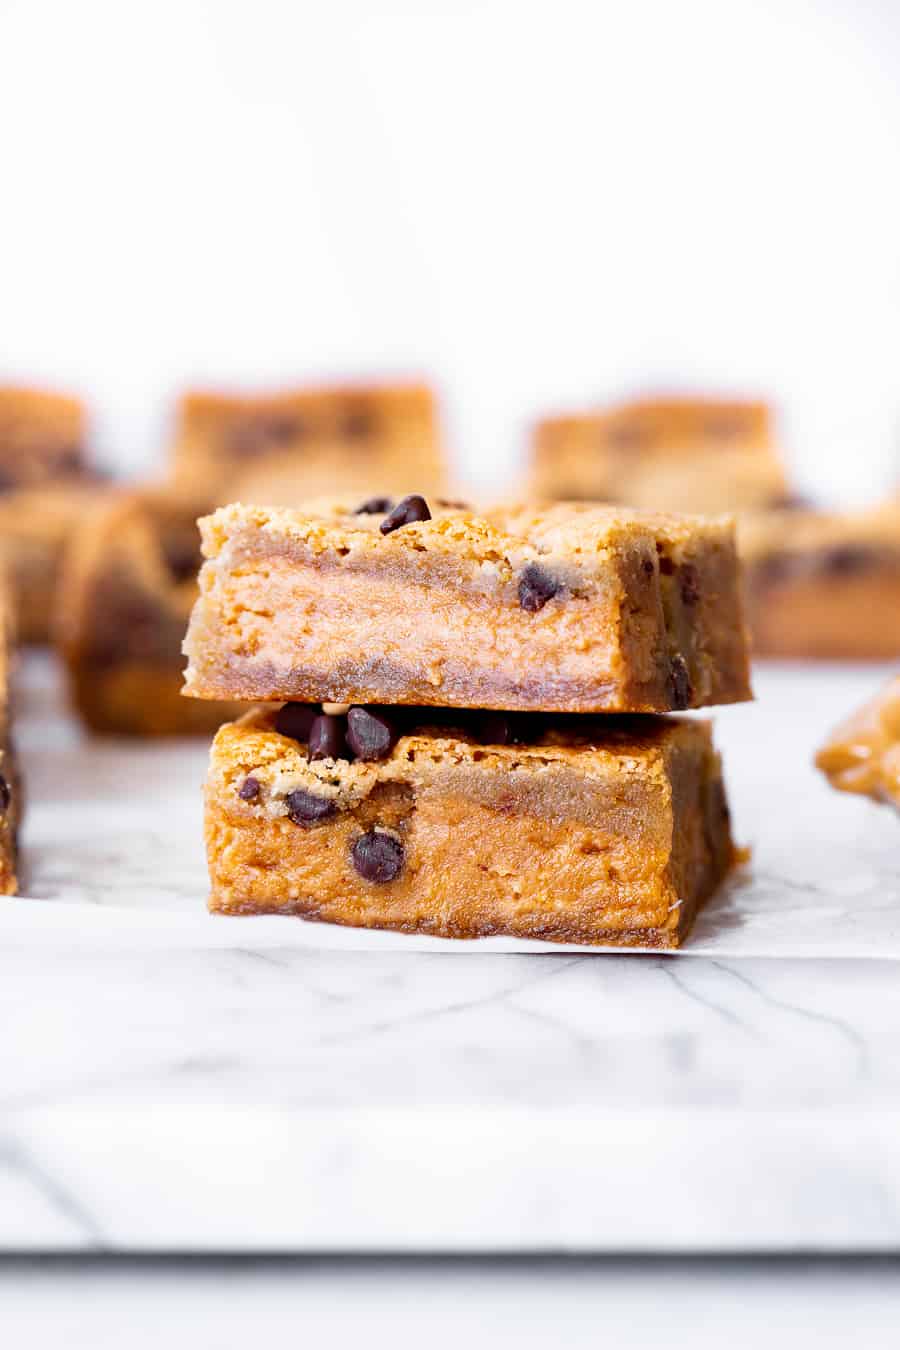 These super fudgy chocolate chip blondies are stuffed with a thick fudgy layer of nut butter for the dreamiest “peanut” butter stuffed blondies you’ll ever make!  They’re gluten free, dairy free, vegan, egg free and insanely delicious! #vegan #paleo #glutenfree